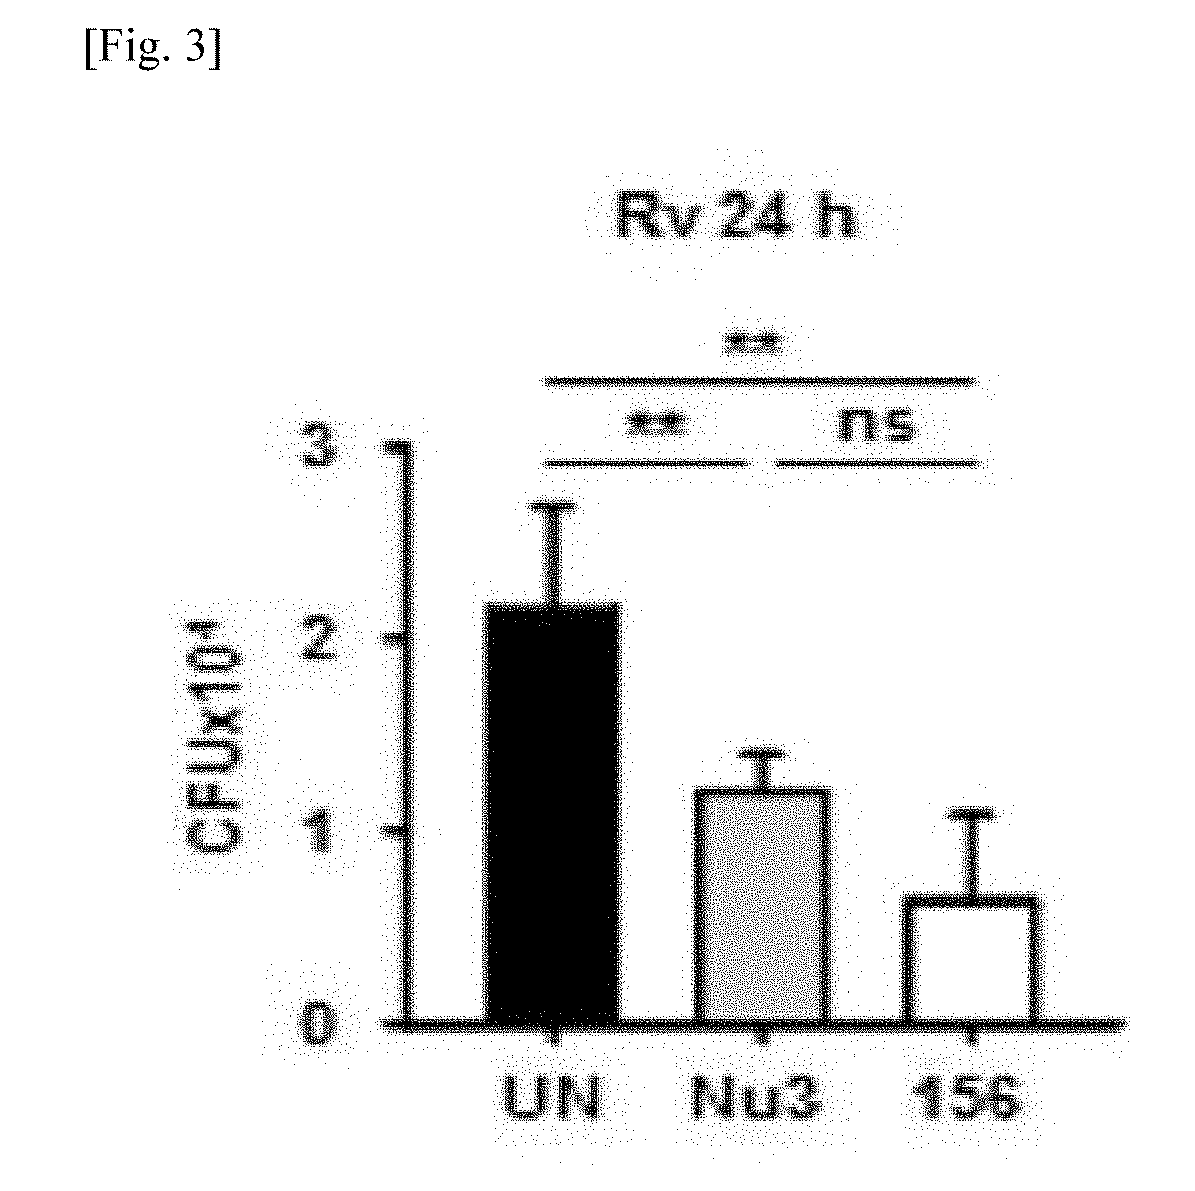 Method for preventing or treating tuberculosis by a p53 expression regulating composition for m. tuberculosis control in cells and the use thereof